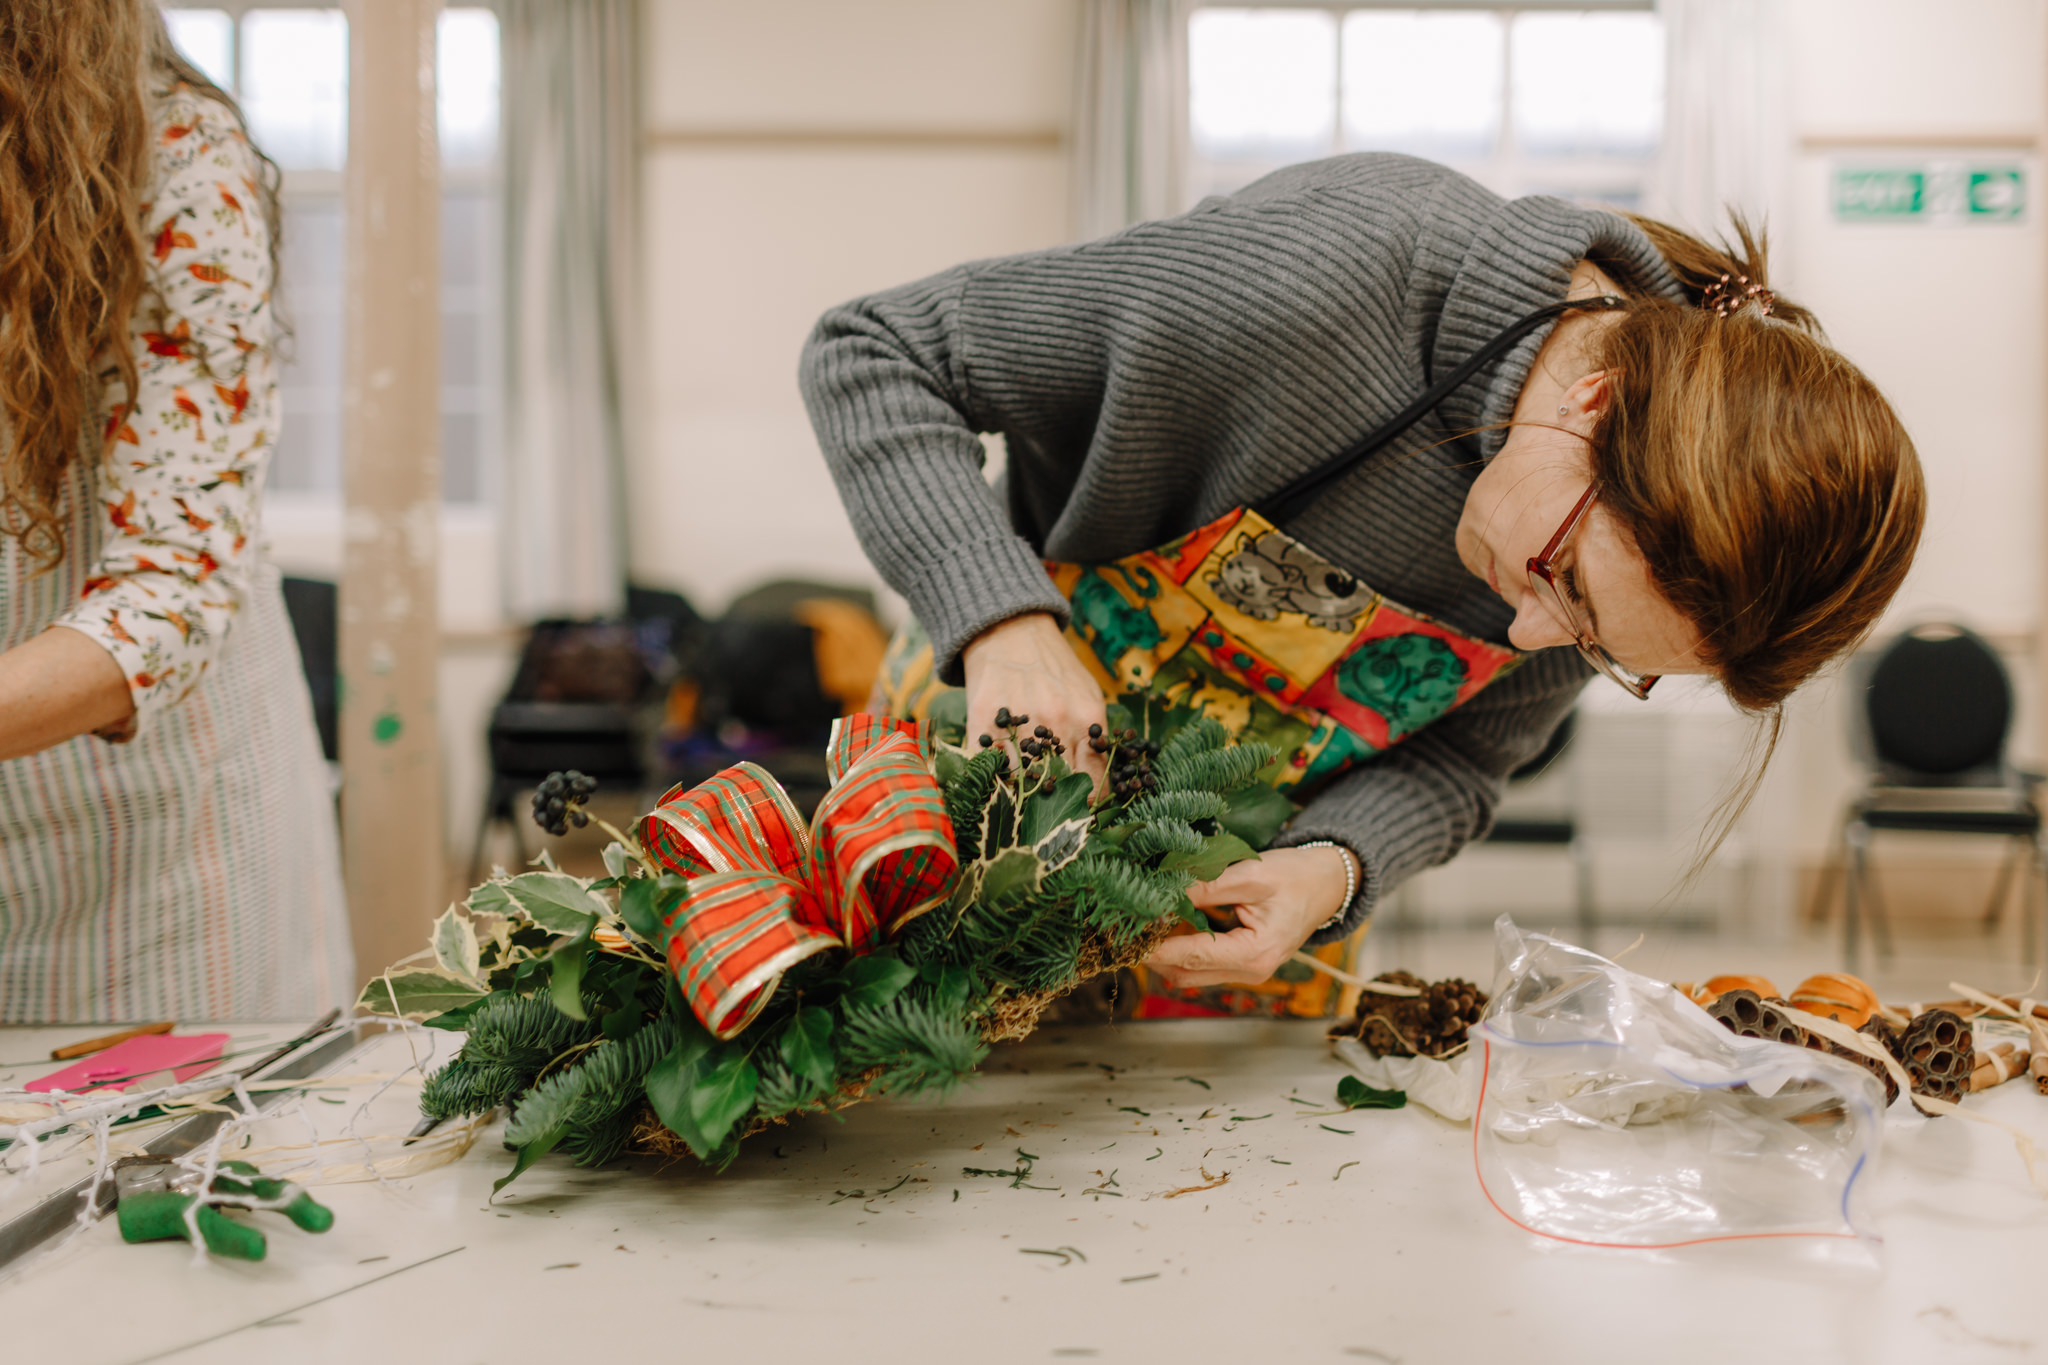 Woman looks closely at her Christmas wreath while attaching decoration to it